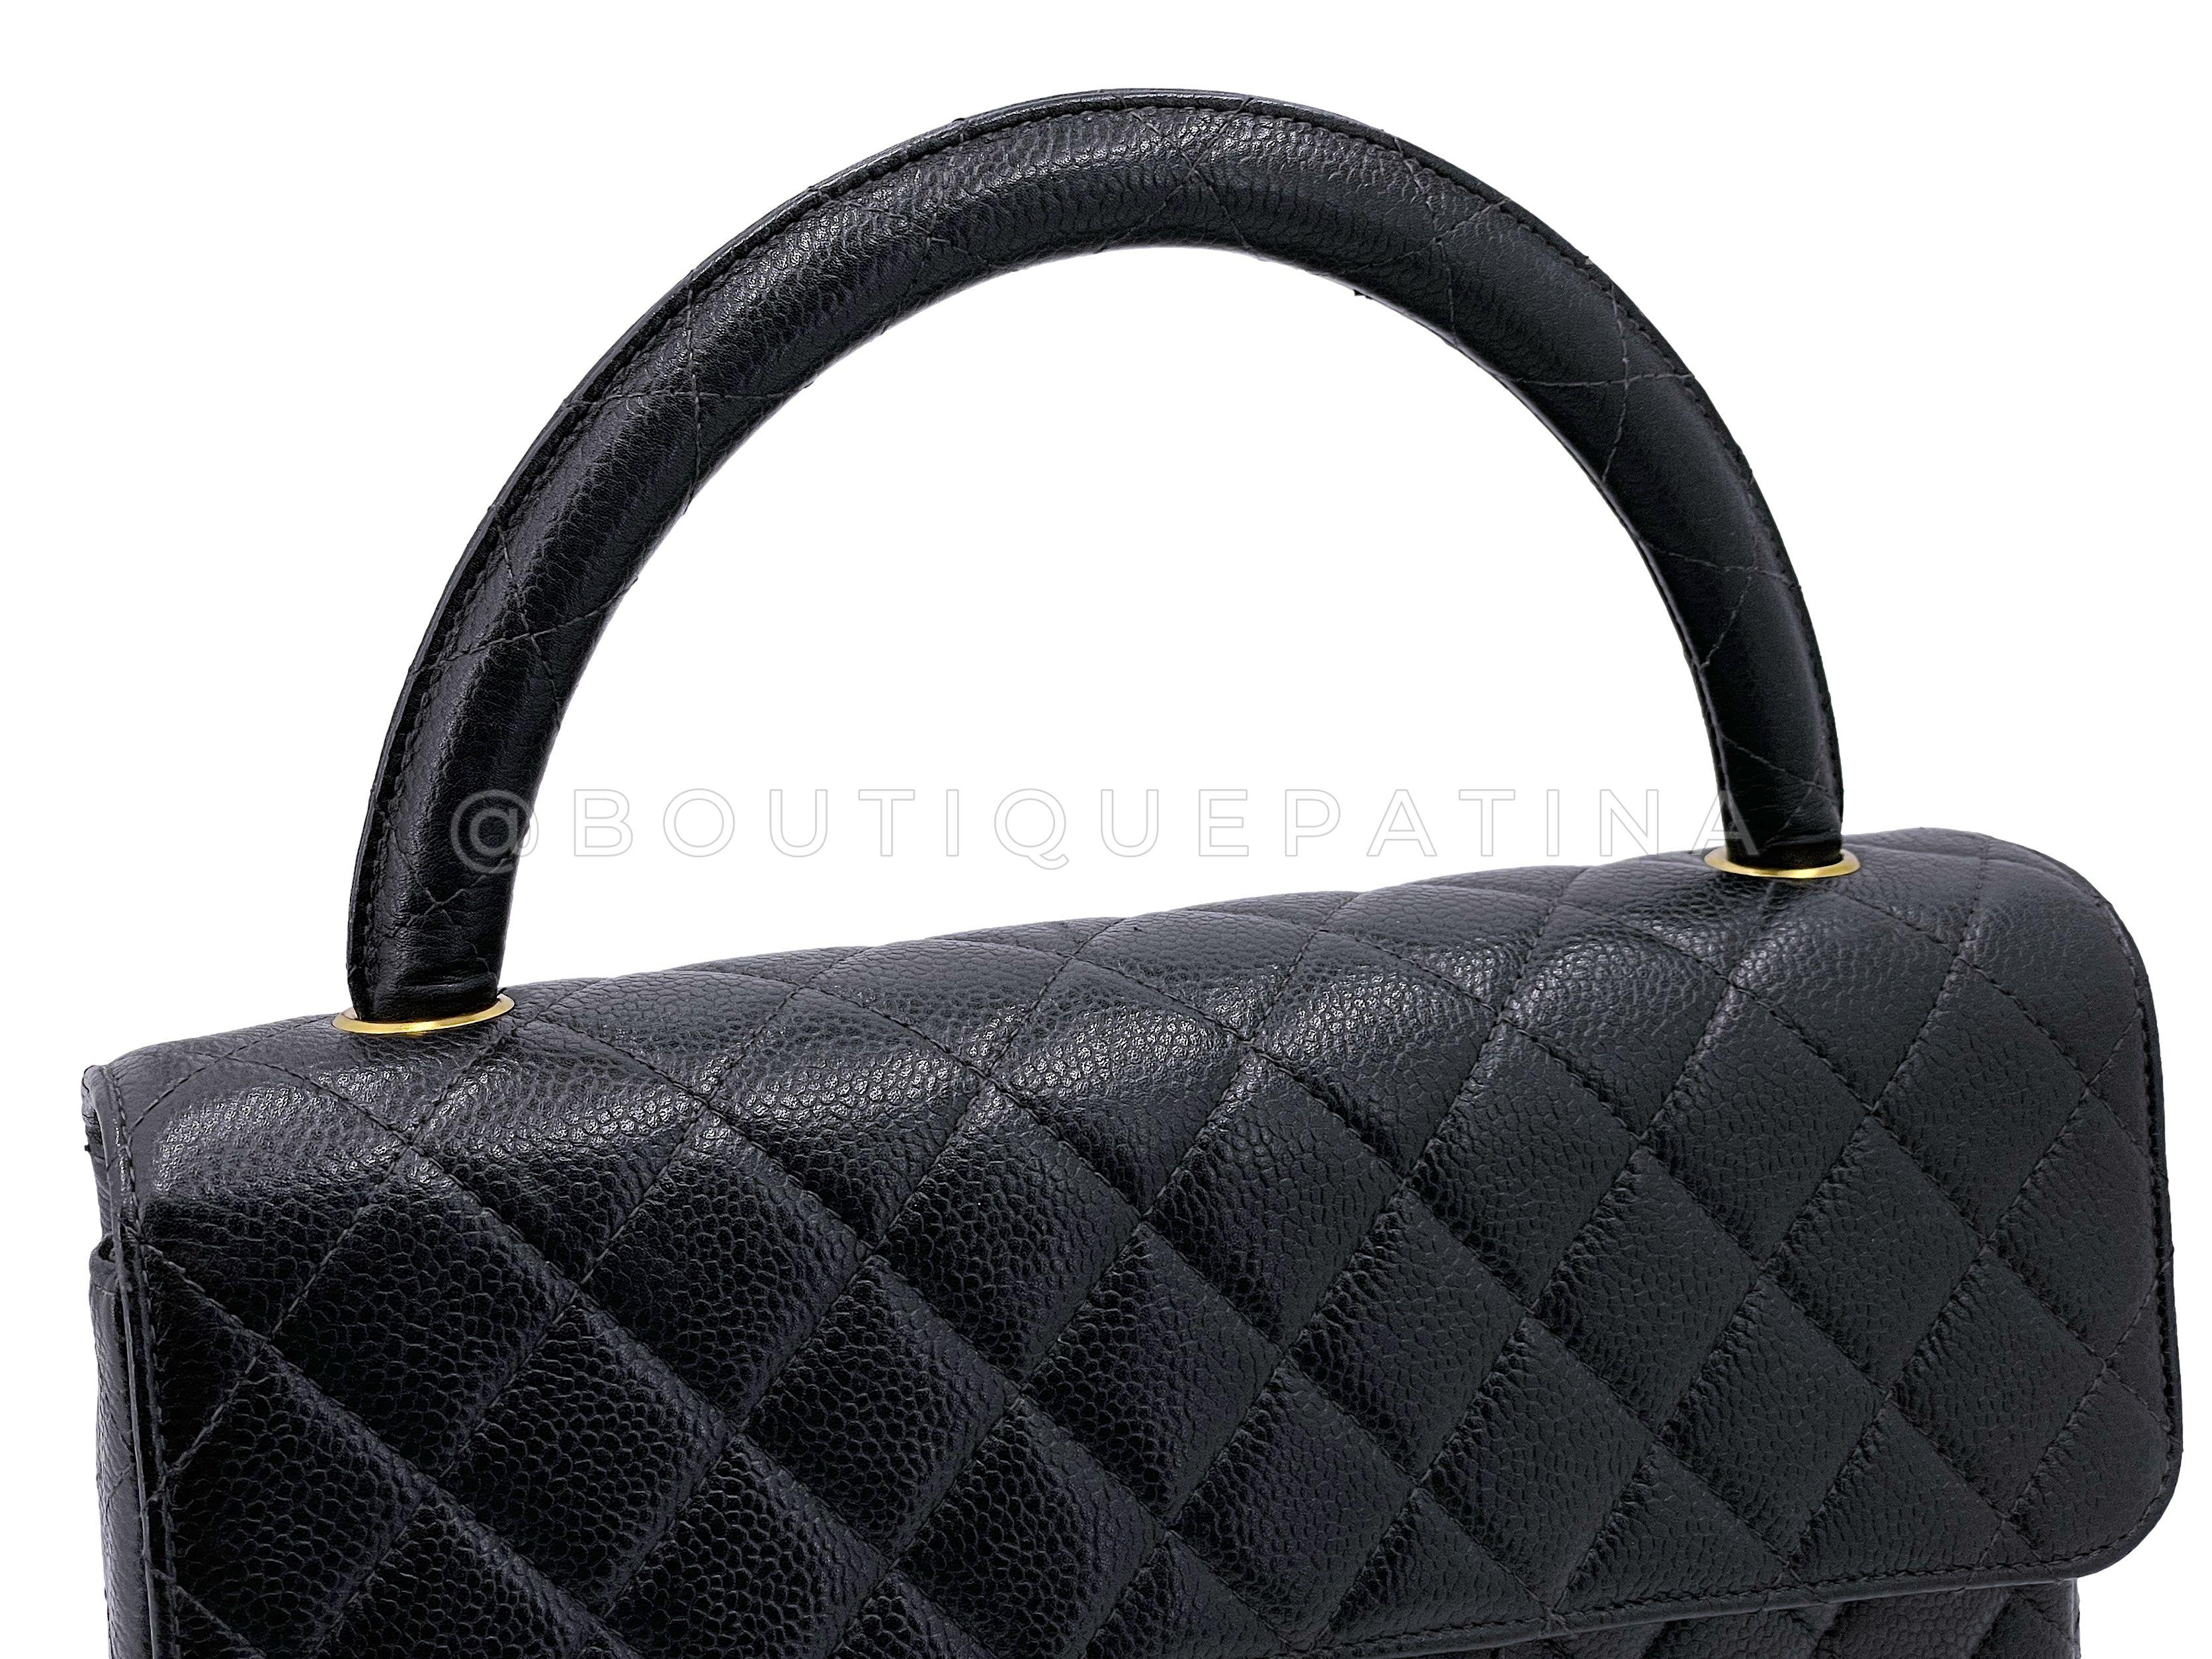 Chanel 1997 Vintage Black Caviar Kelly Flap Parent Bag 24k GHW 67702 In Excellent Condition For Sale In Costa Mesa, CA